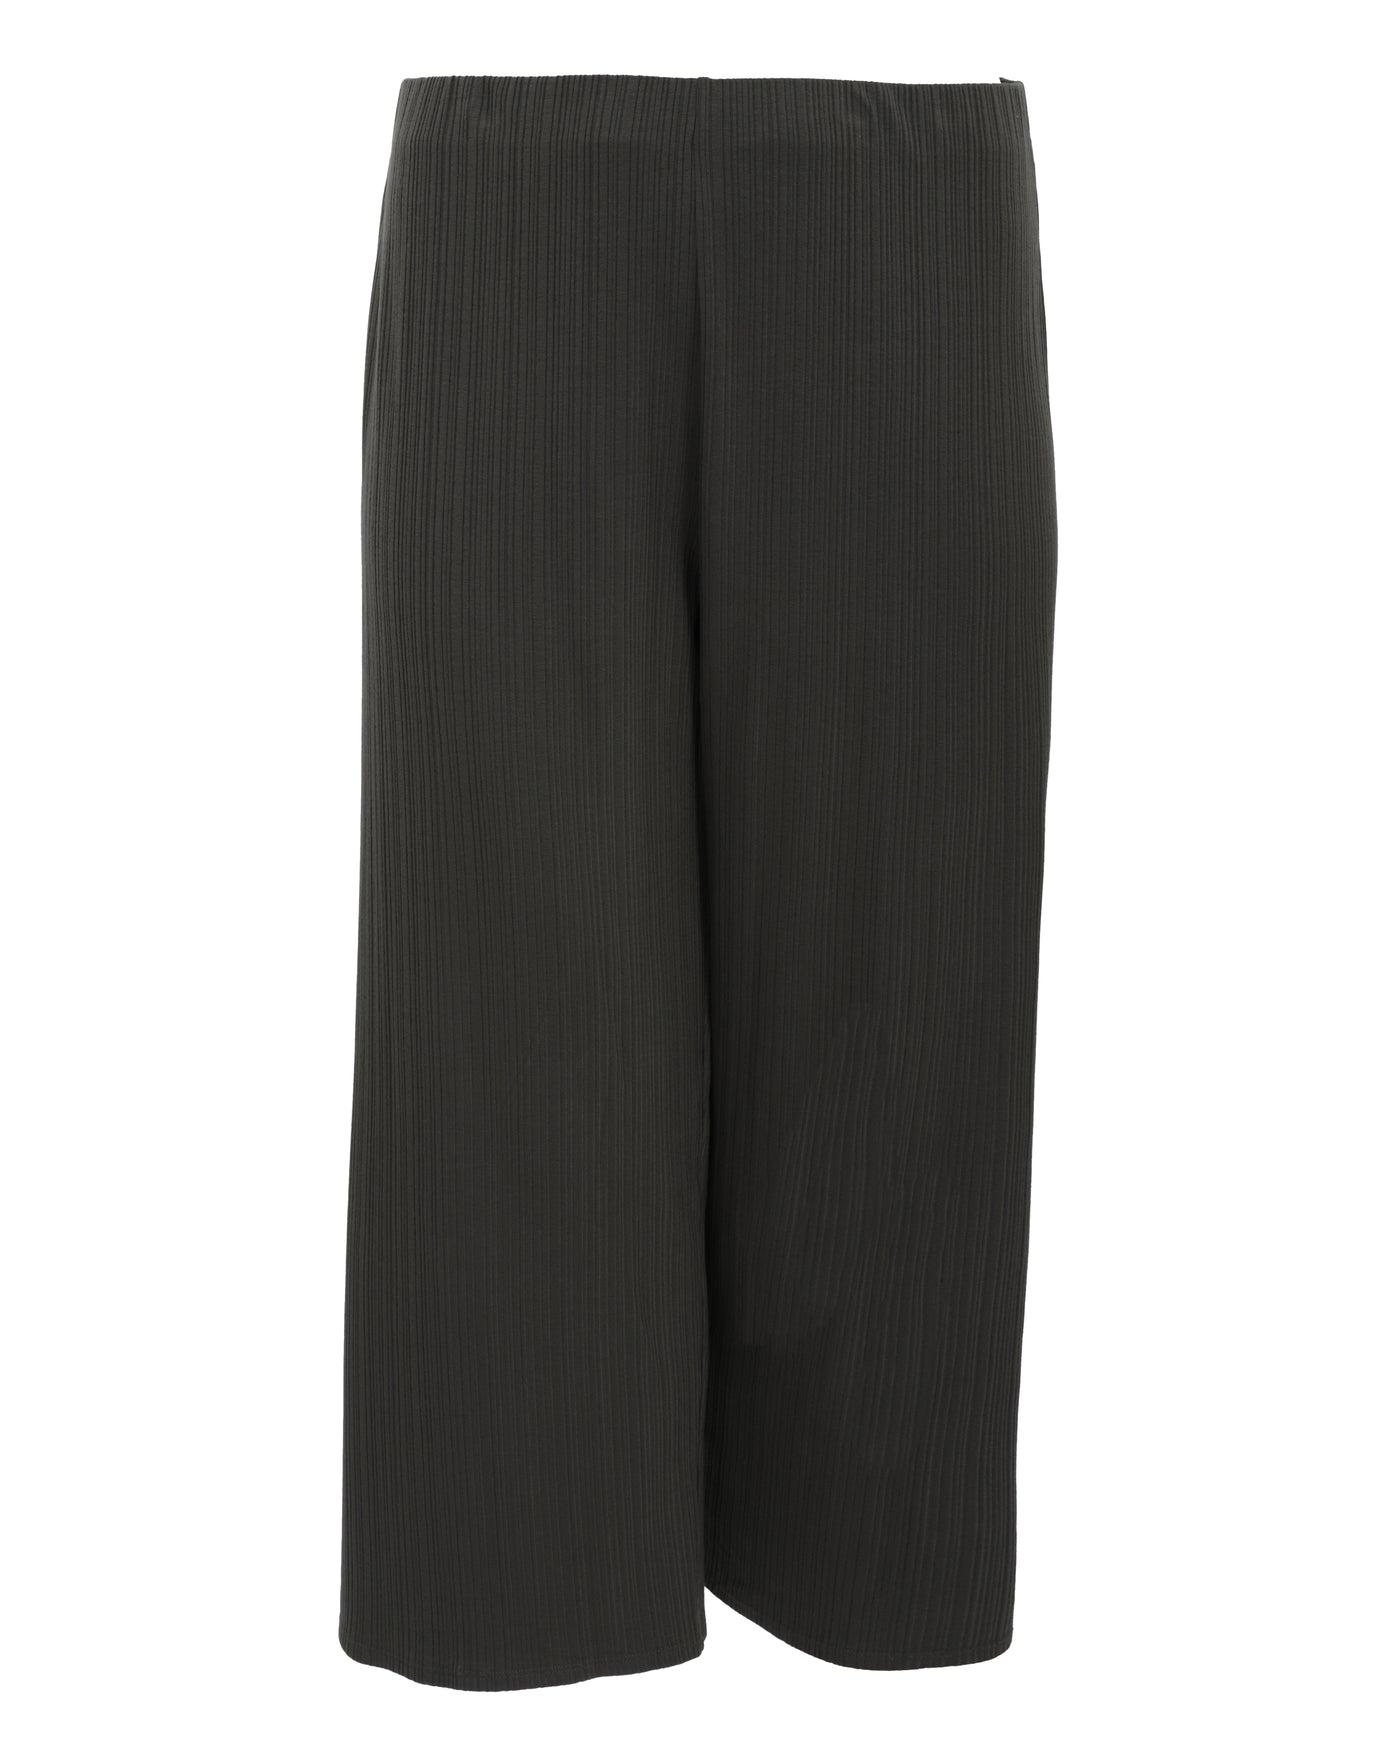 Eileen Fisher Variegated Rib Knit Wide Ankle Pant in Grove